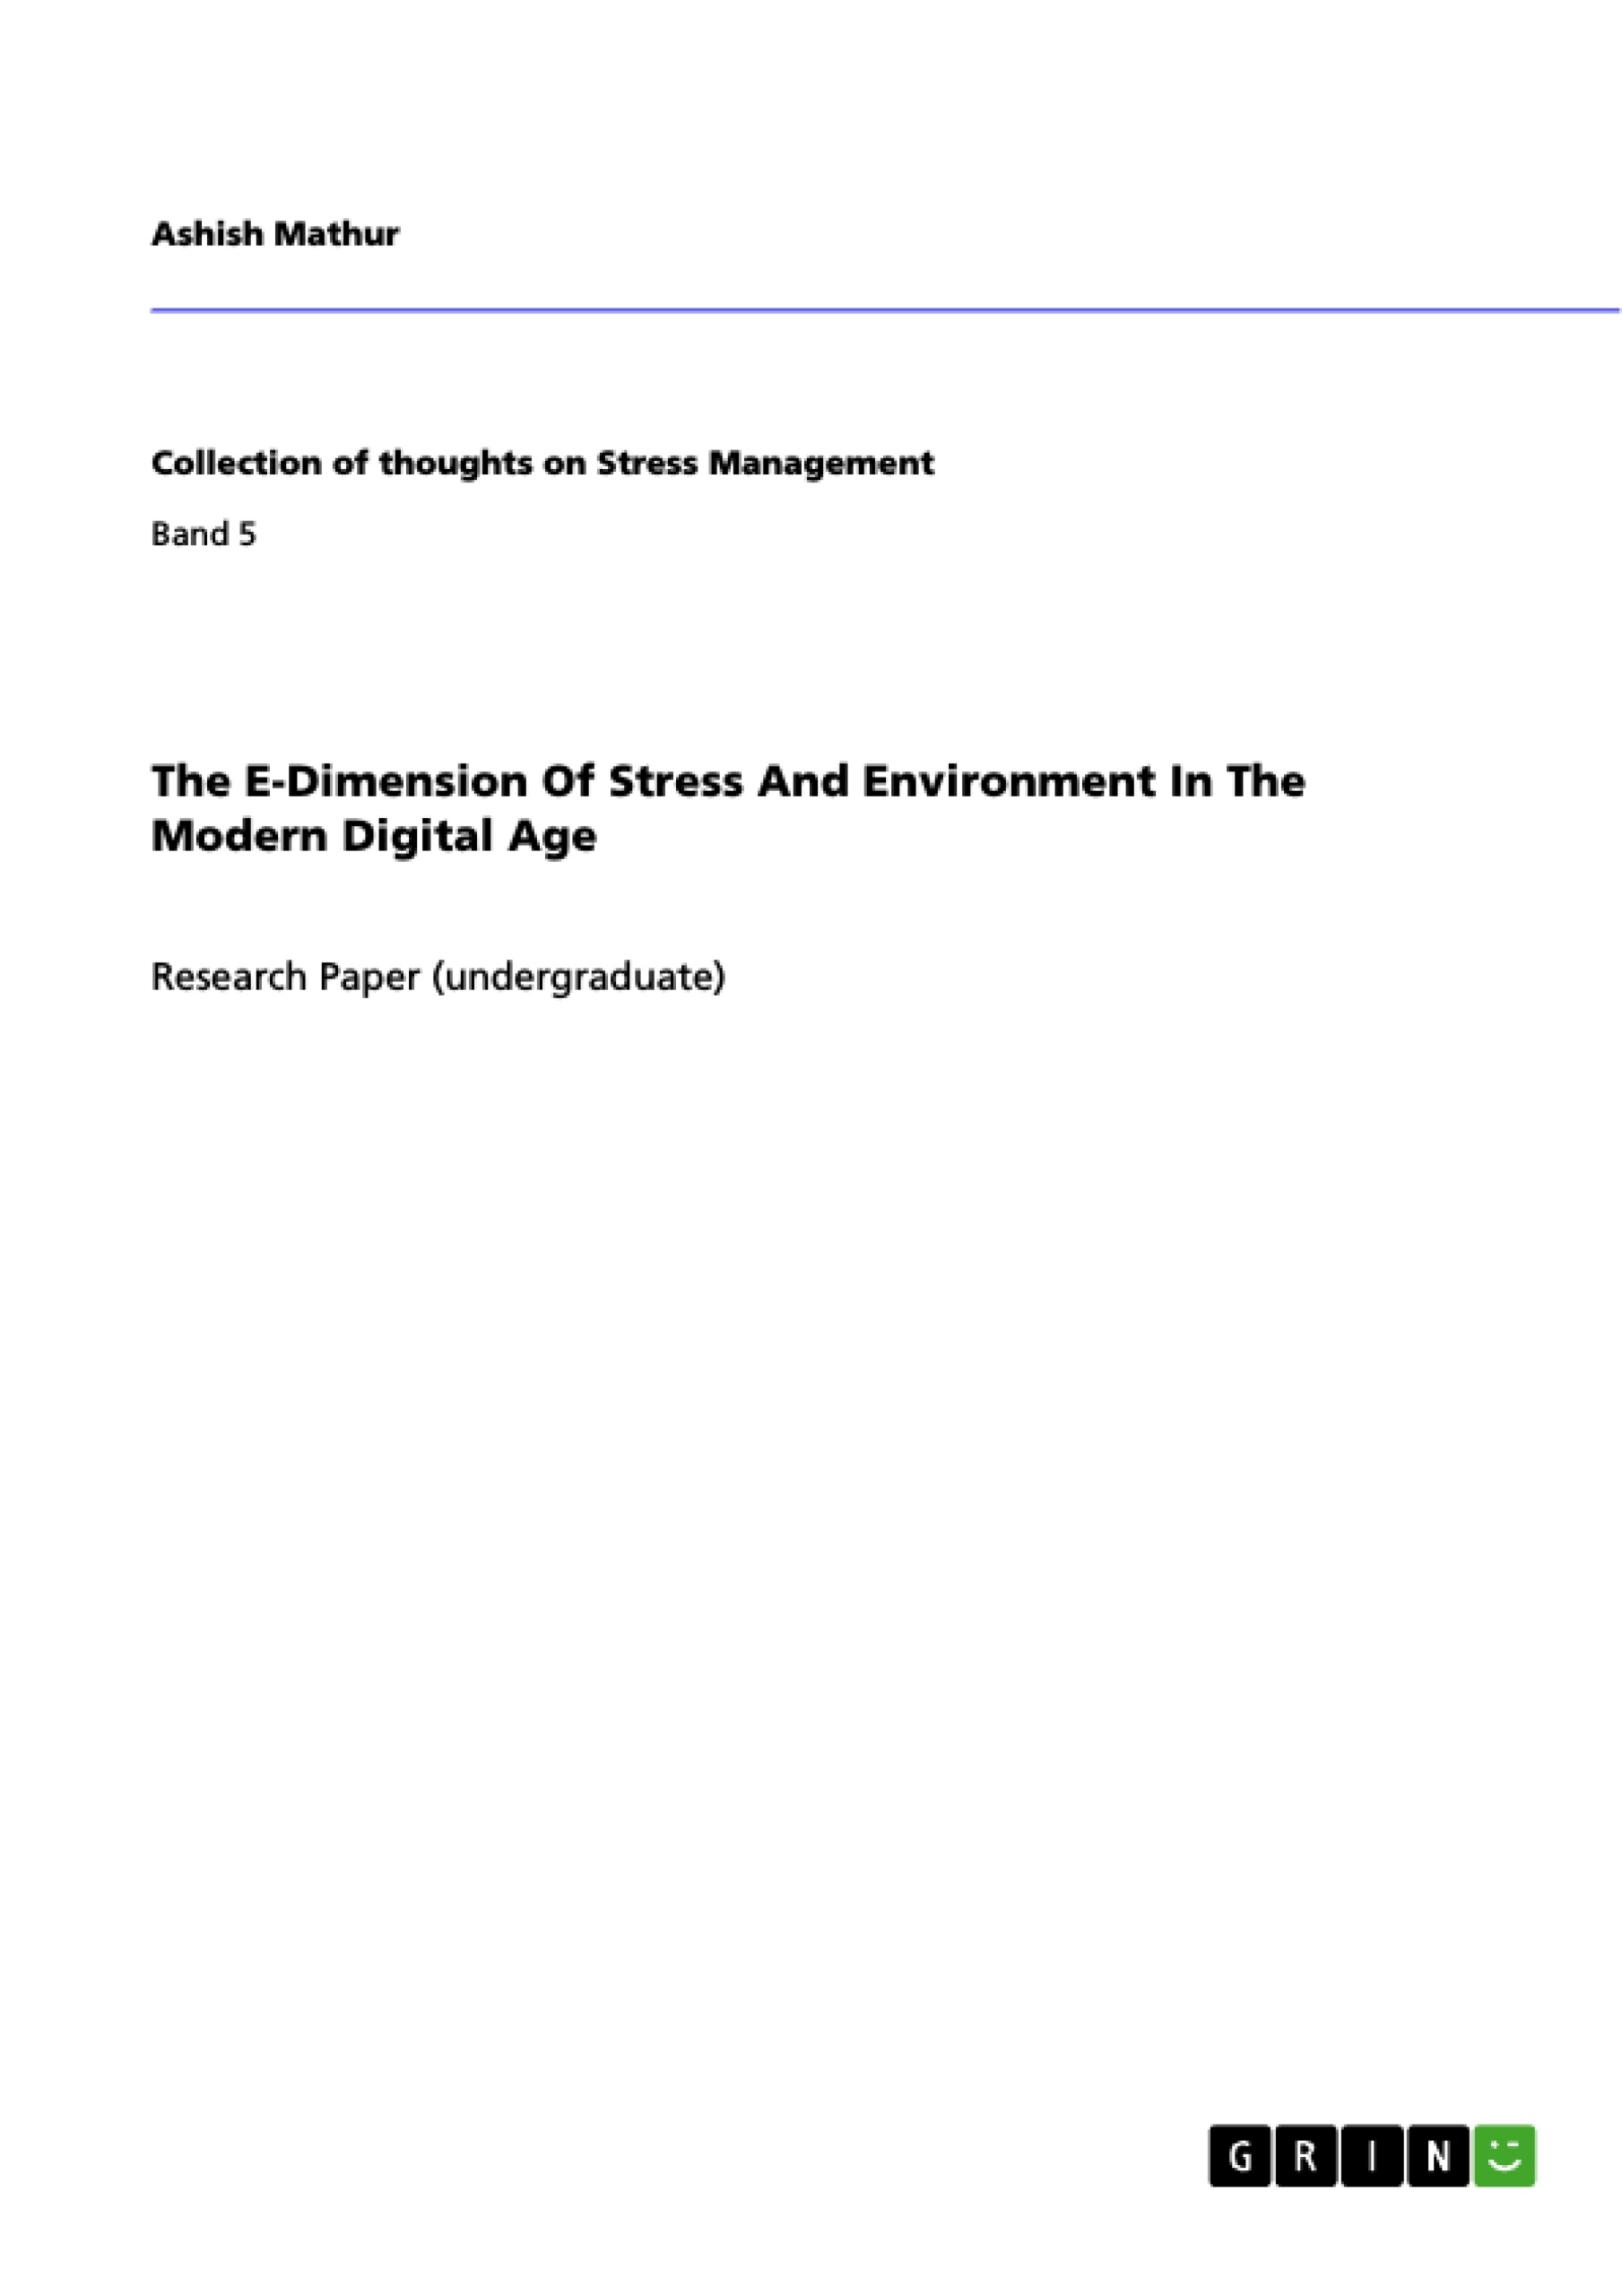 Título: The E-Dimension Of Stress And Environment In The Modern Digital Age